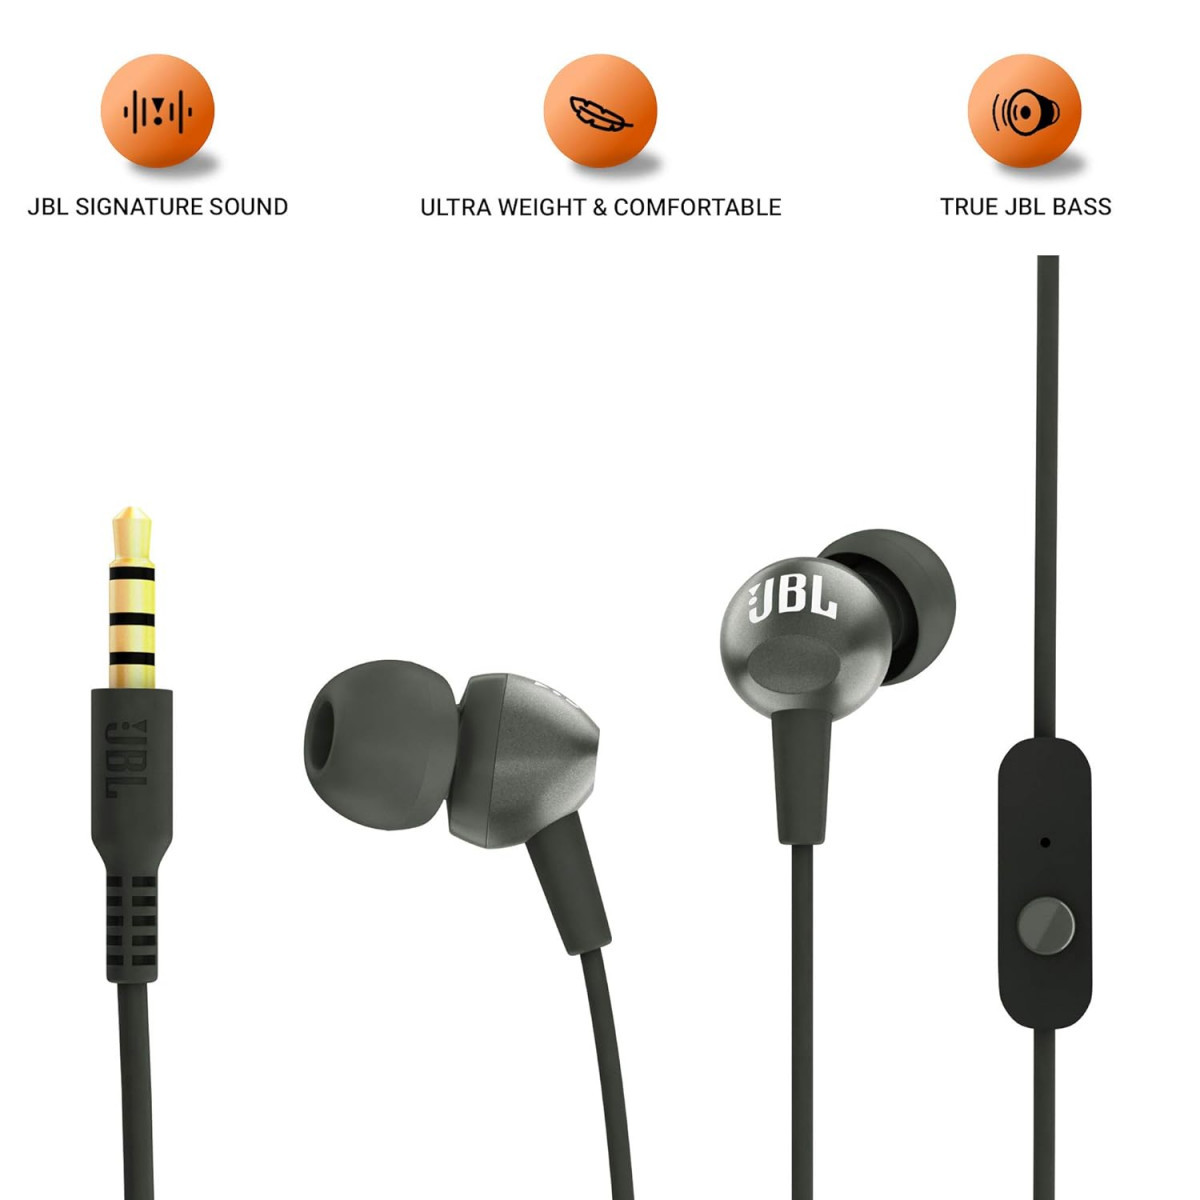 JBL C200SI Premium in Ear Wired Earphones with Mic Signature Sound One Button Multi-Function Remote Premium Metallic Finish Angled Earbuds for Comfort fit Gun Metal